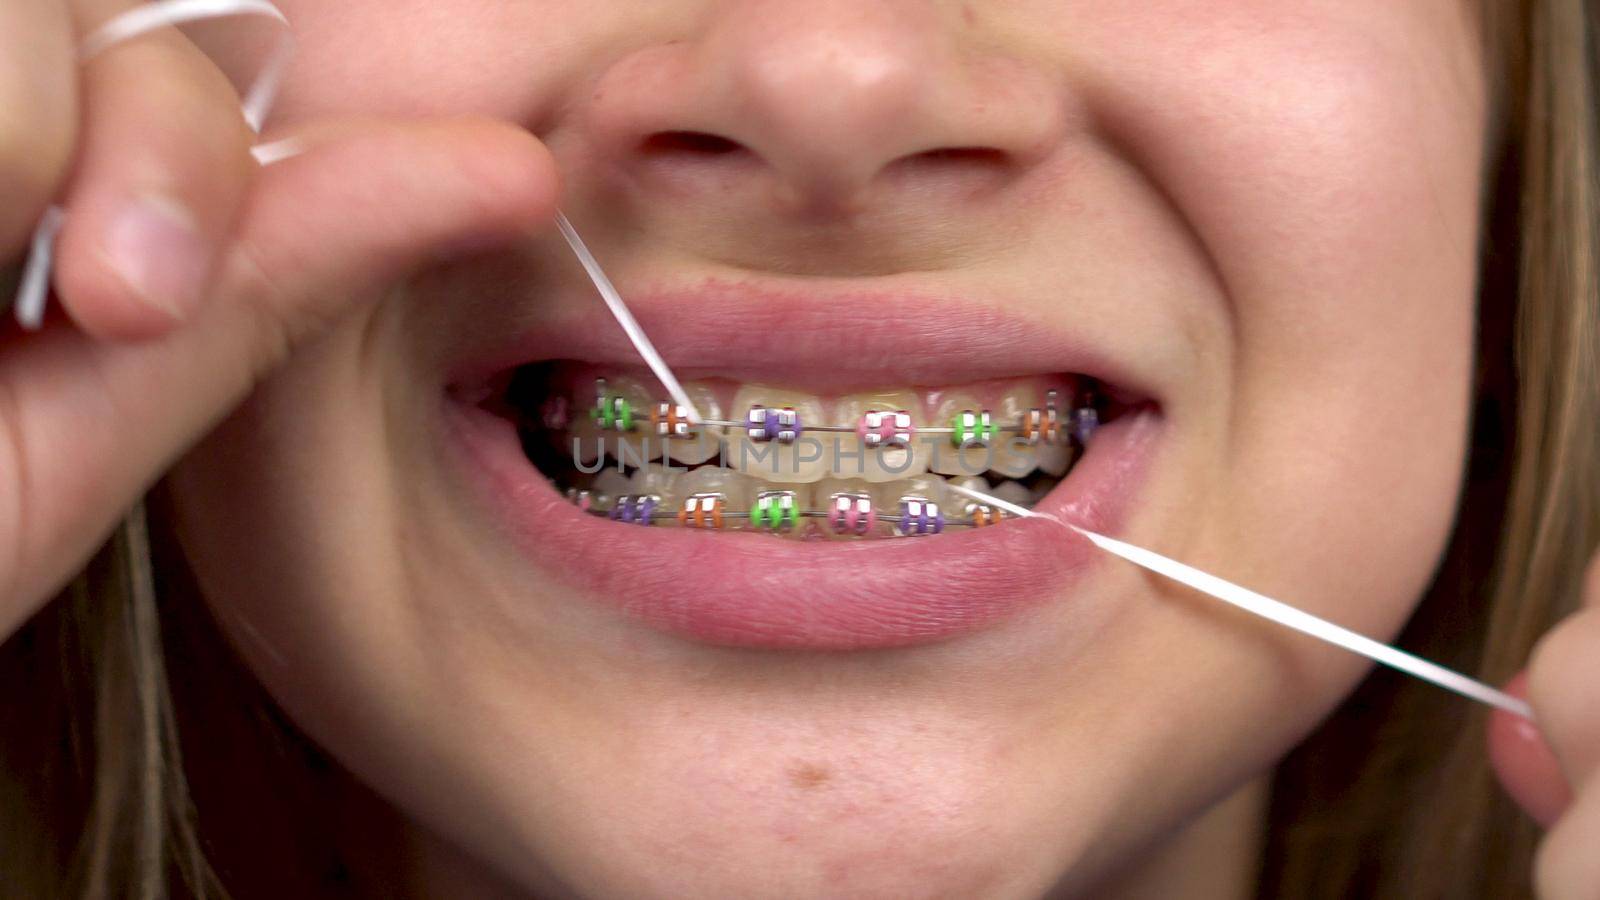 Girl with braces brushing your teeth with dental floss closeup. A girl with colored braces on her teeth keeps her teeth clean. 4k